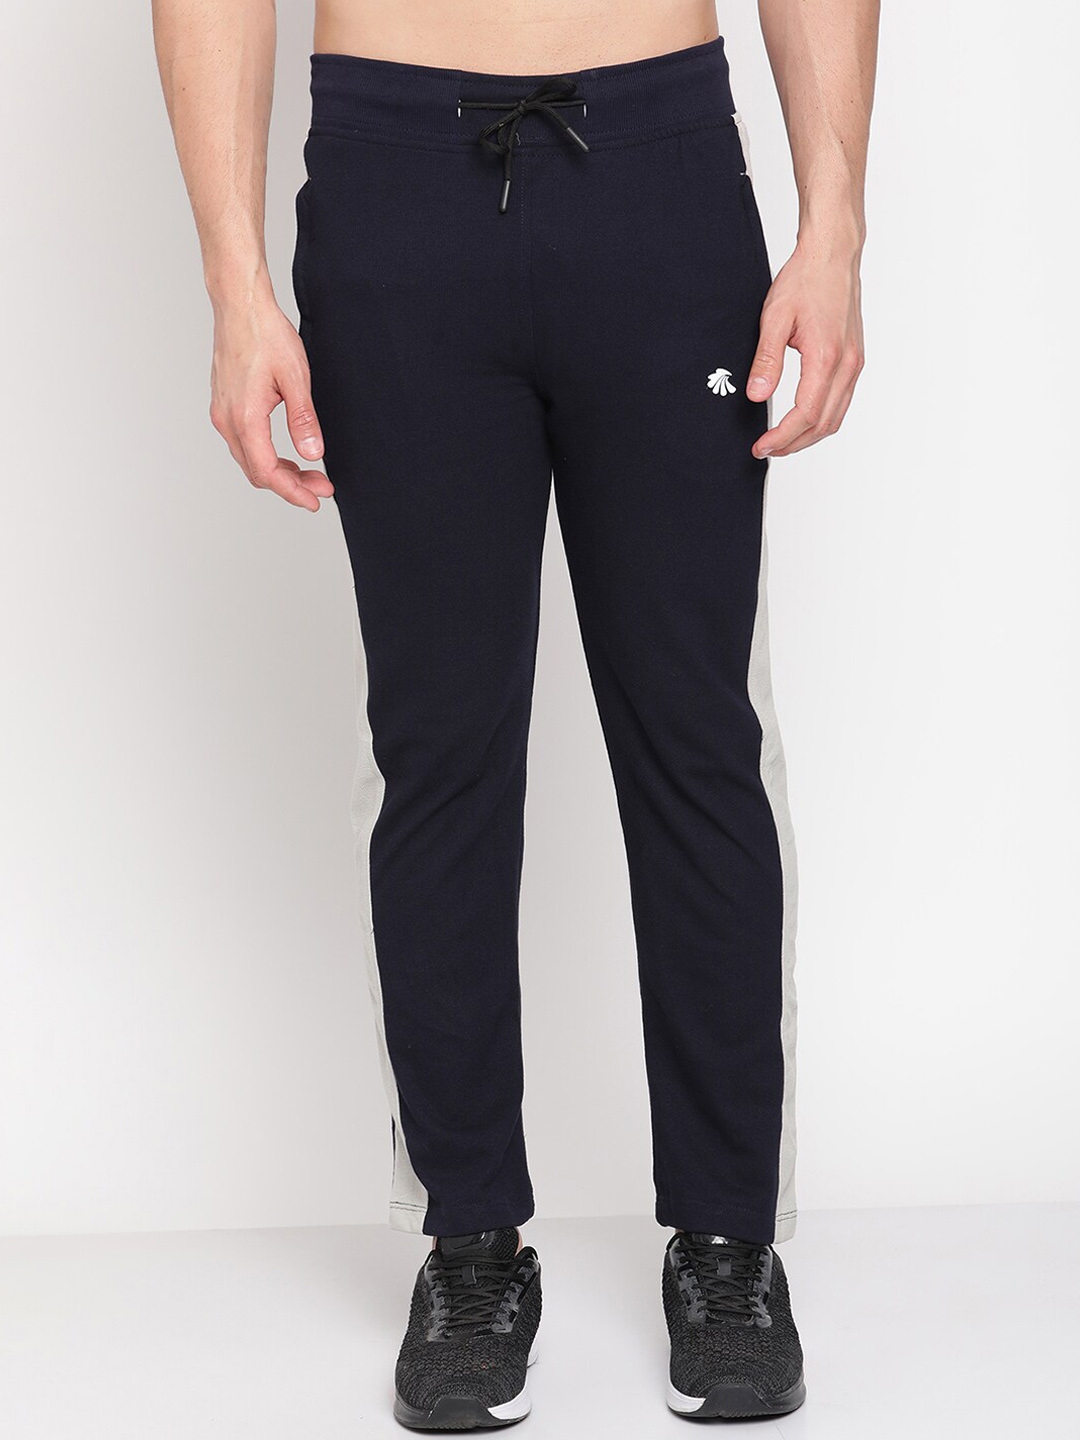 Buy Gallus Men Navy Blue & White Colorblocked Cotton Track Pant - Track ...